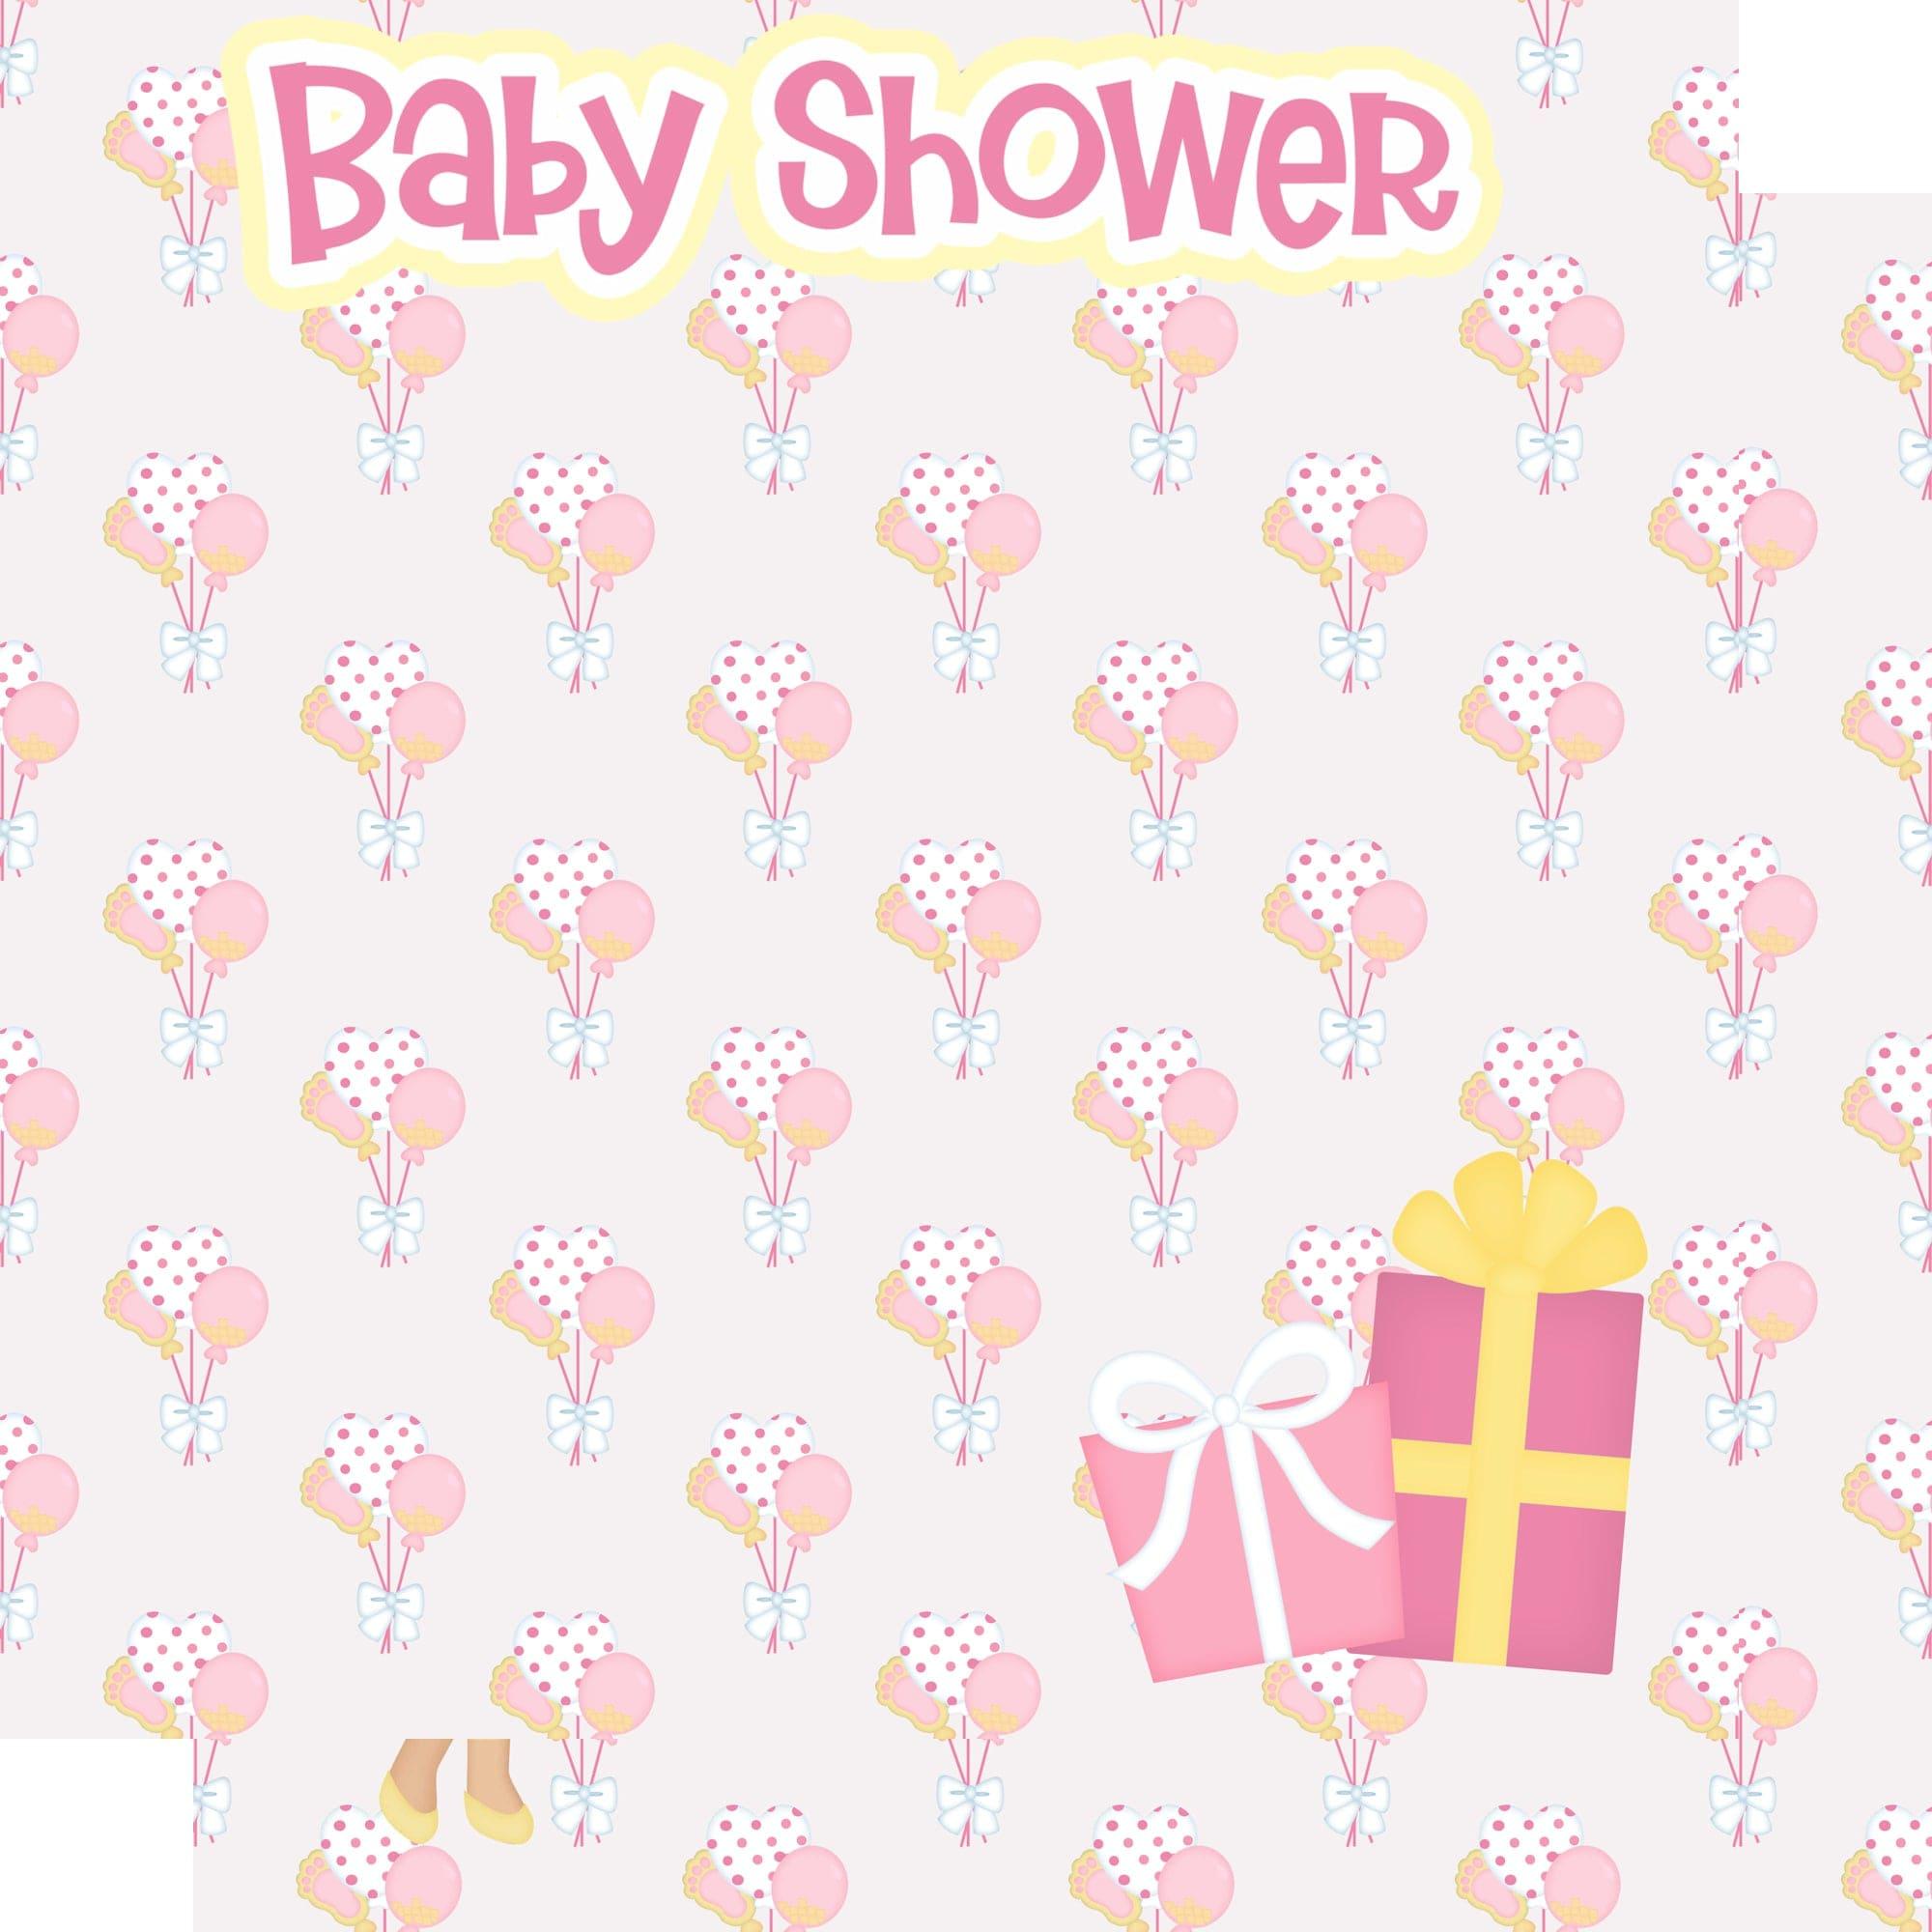 Ready To Pop Collection Baby Shower Girl 12 x 12 Double-Sided Scrapbook Paper by SSC Designs - Scrapbook Supply Companies